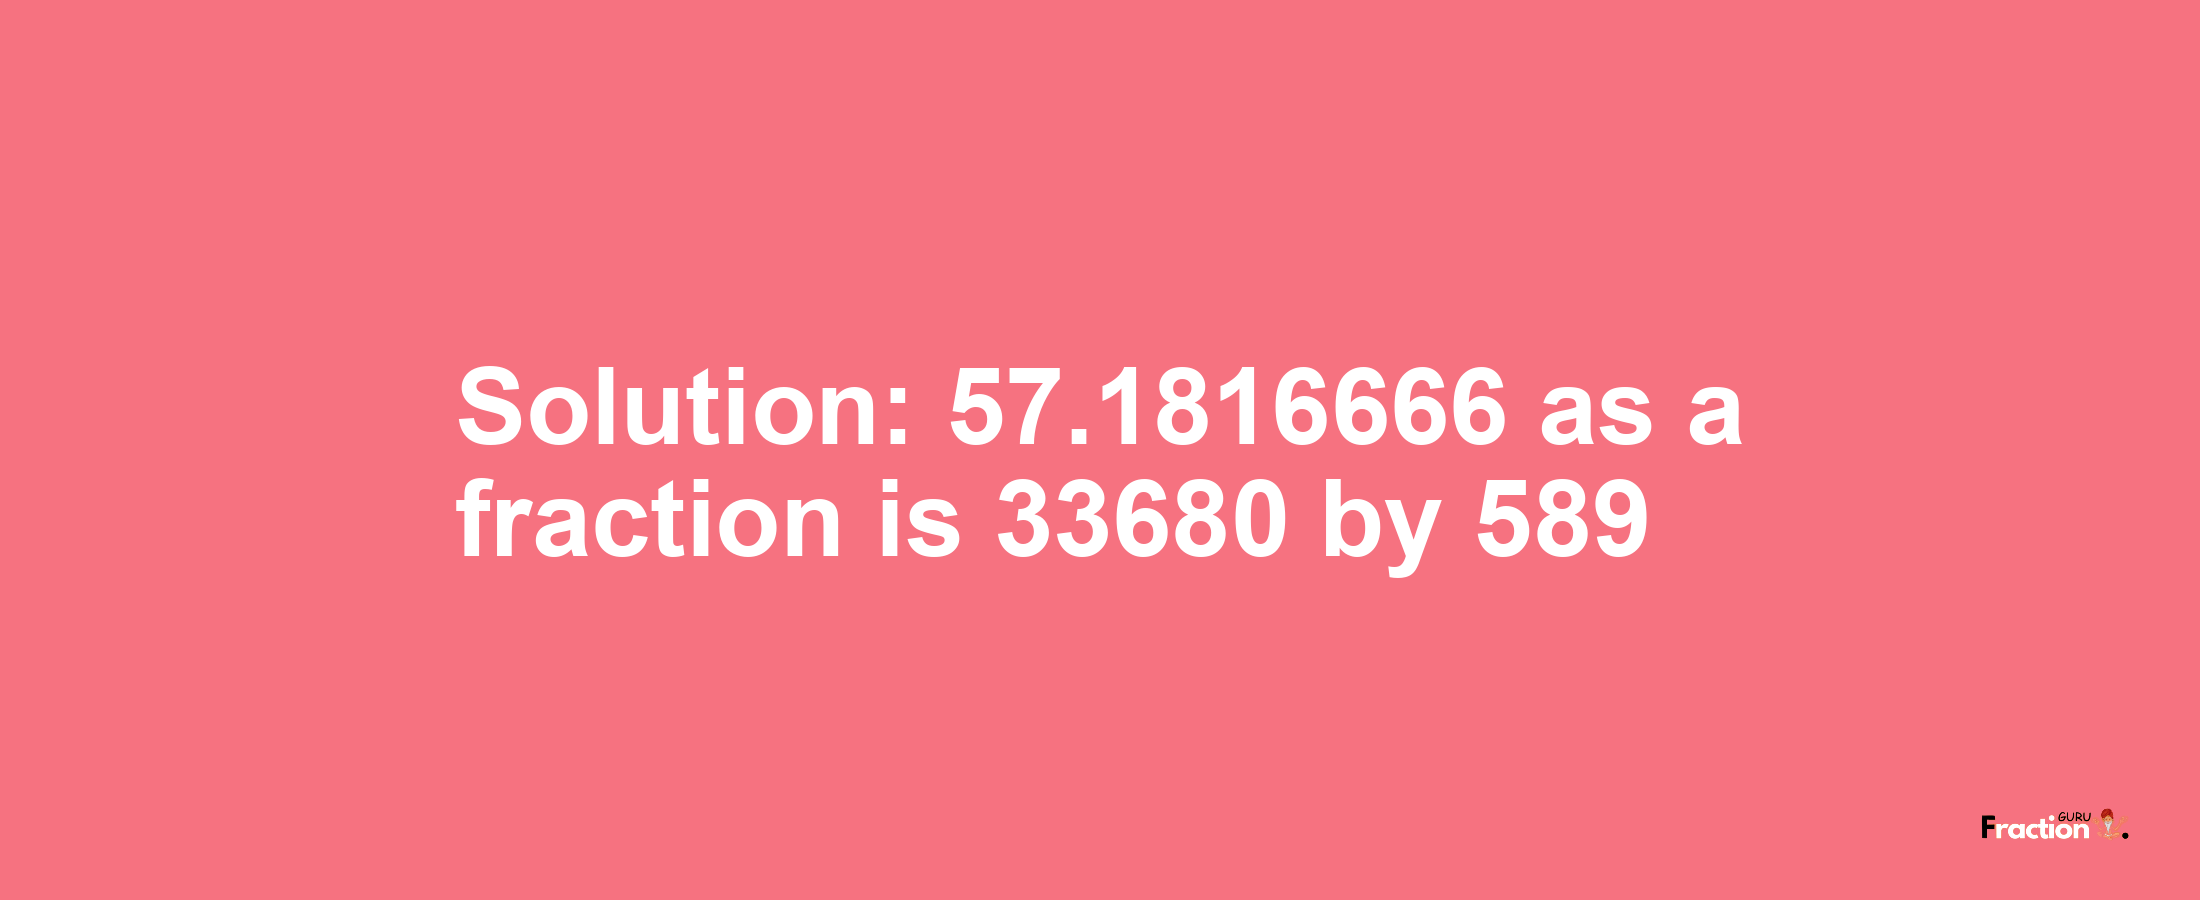 Solution:57.1816666 as a fraction is 33680/589